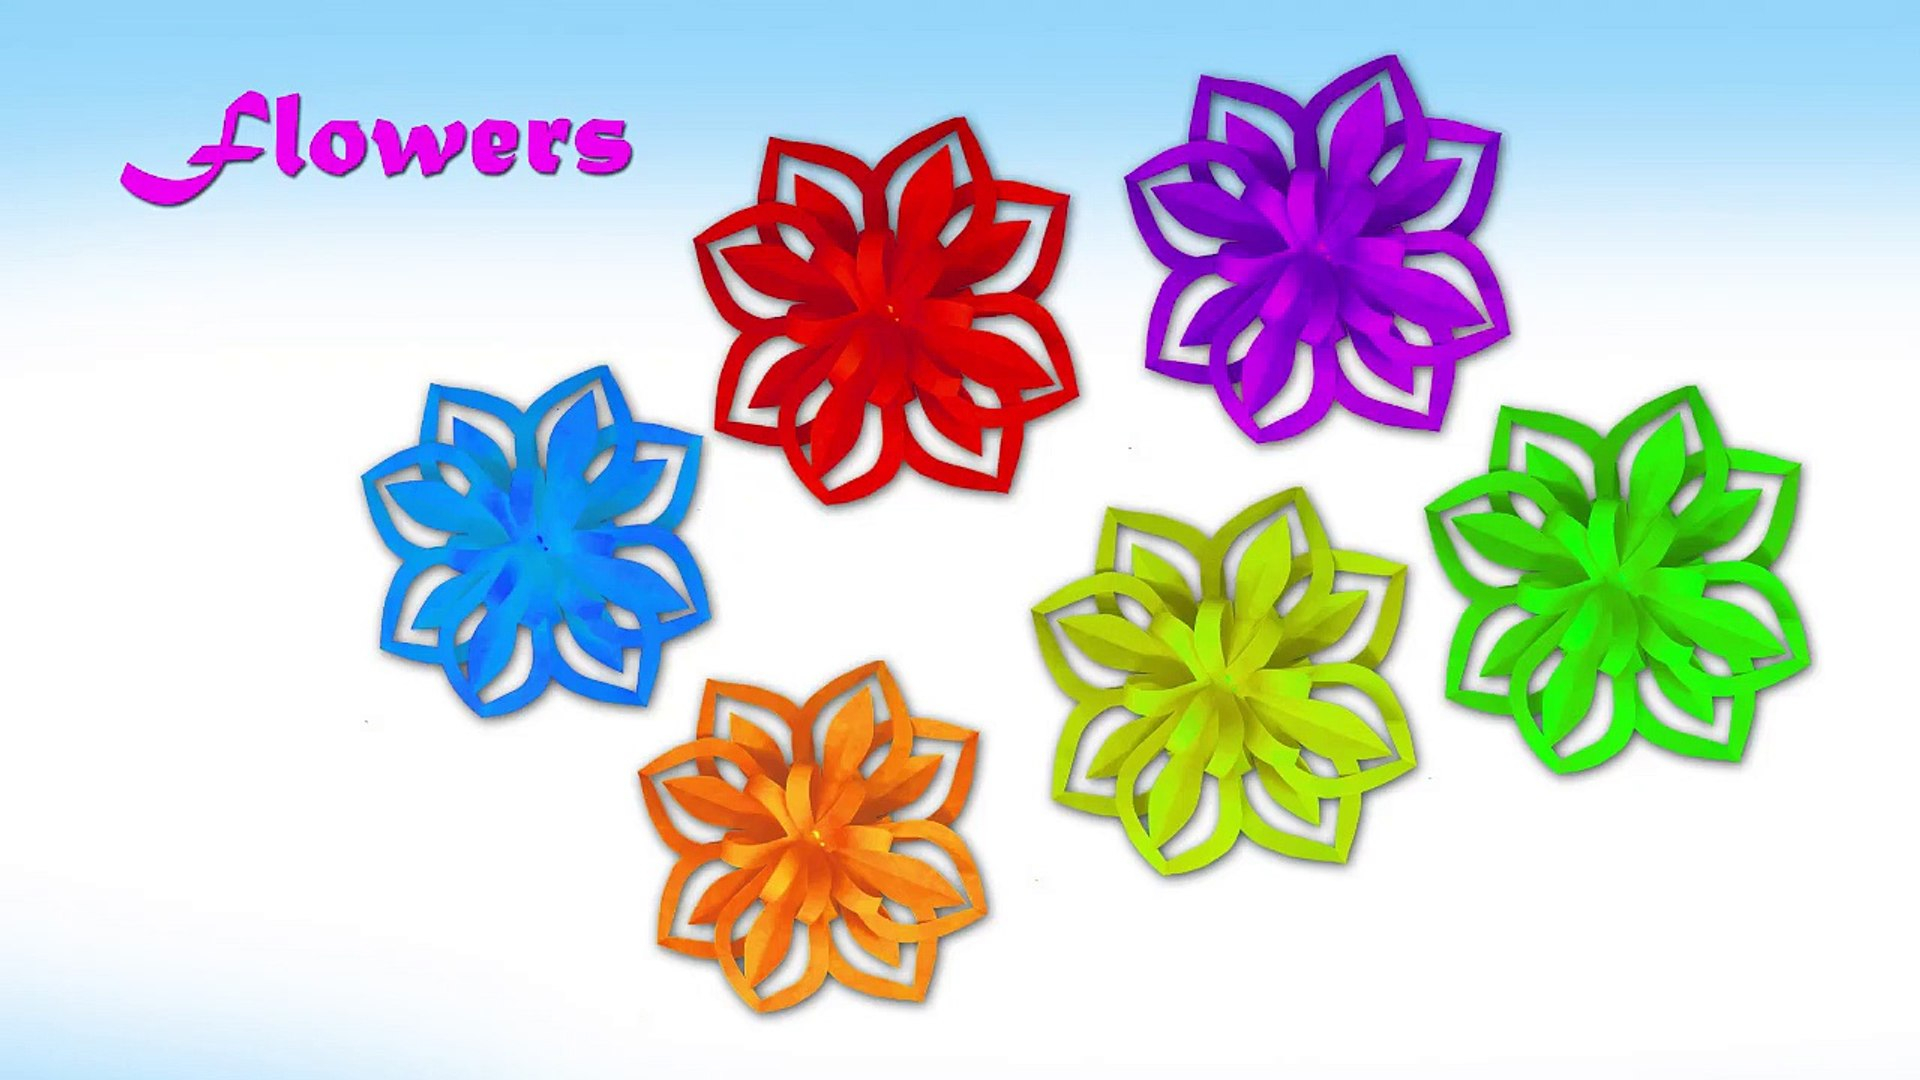 How To Make An Origami Flower Easy Origami Flowers How To Make Origami Flowers Very Easy Origami For All 9sarr7